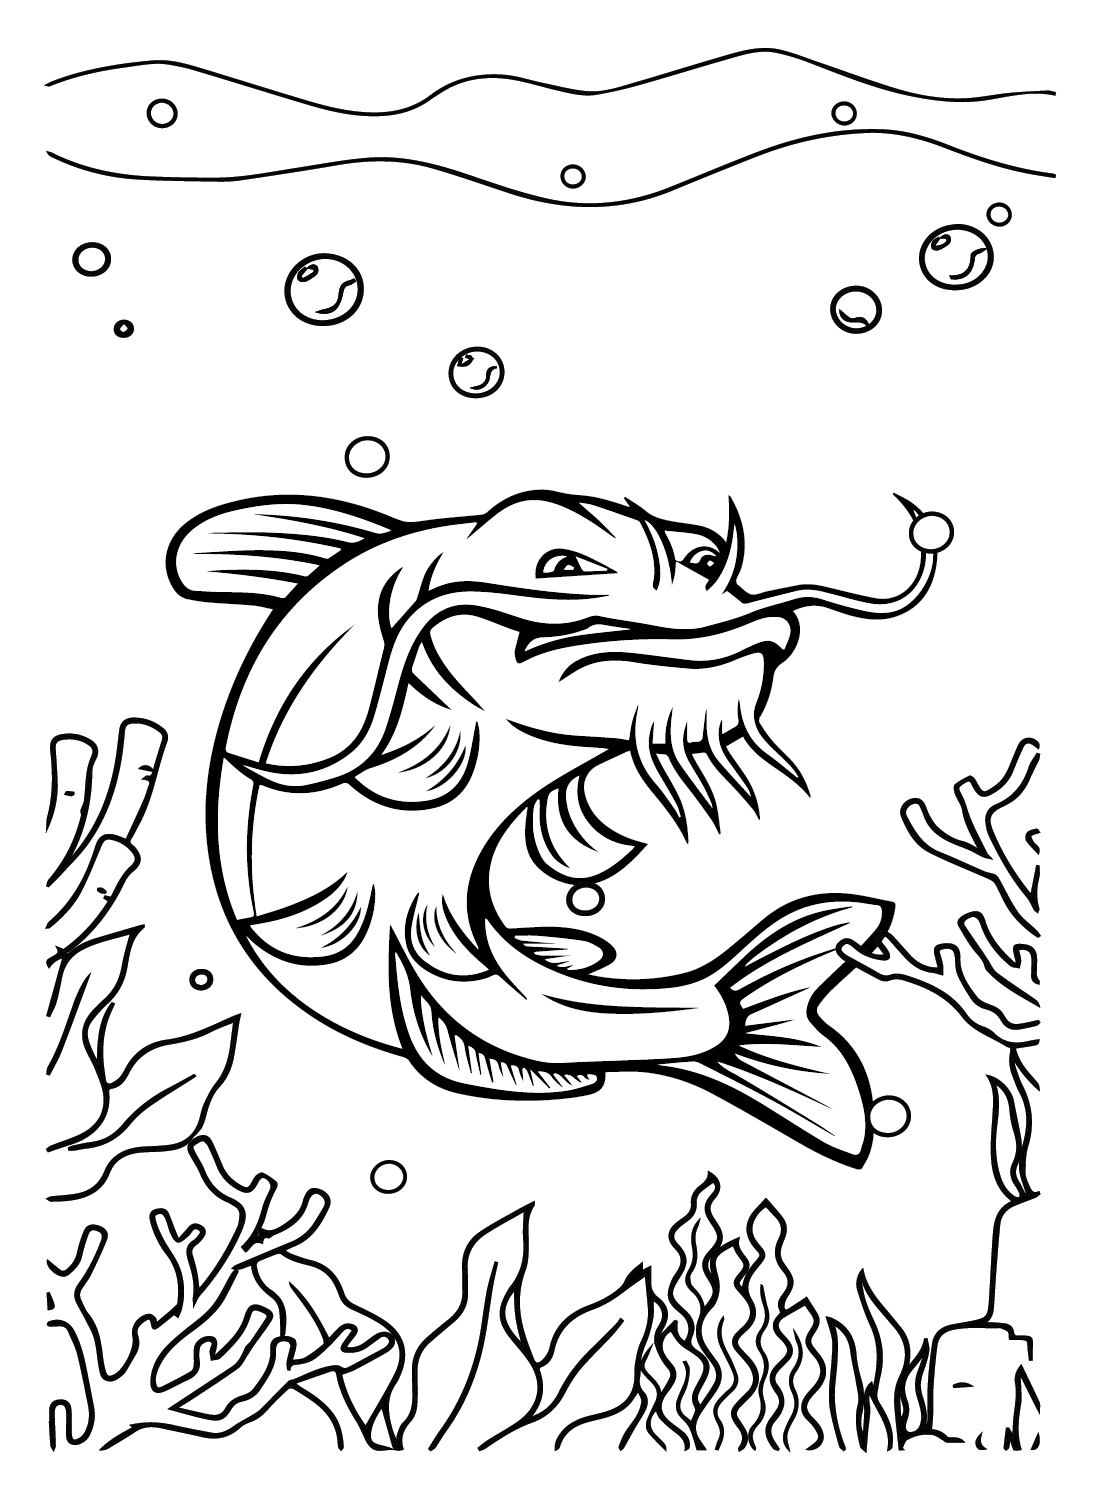 Catfish to Color from Catfish